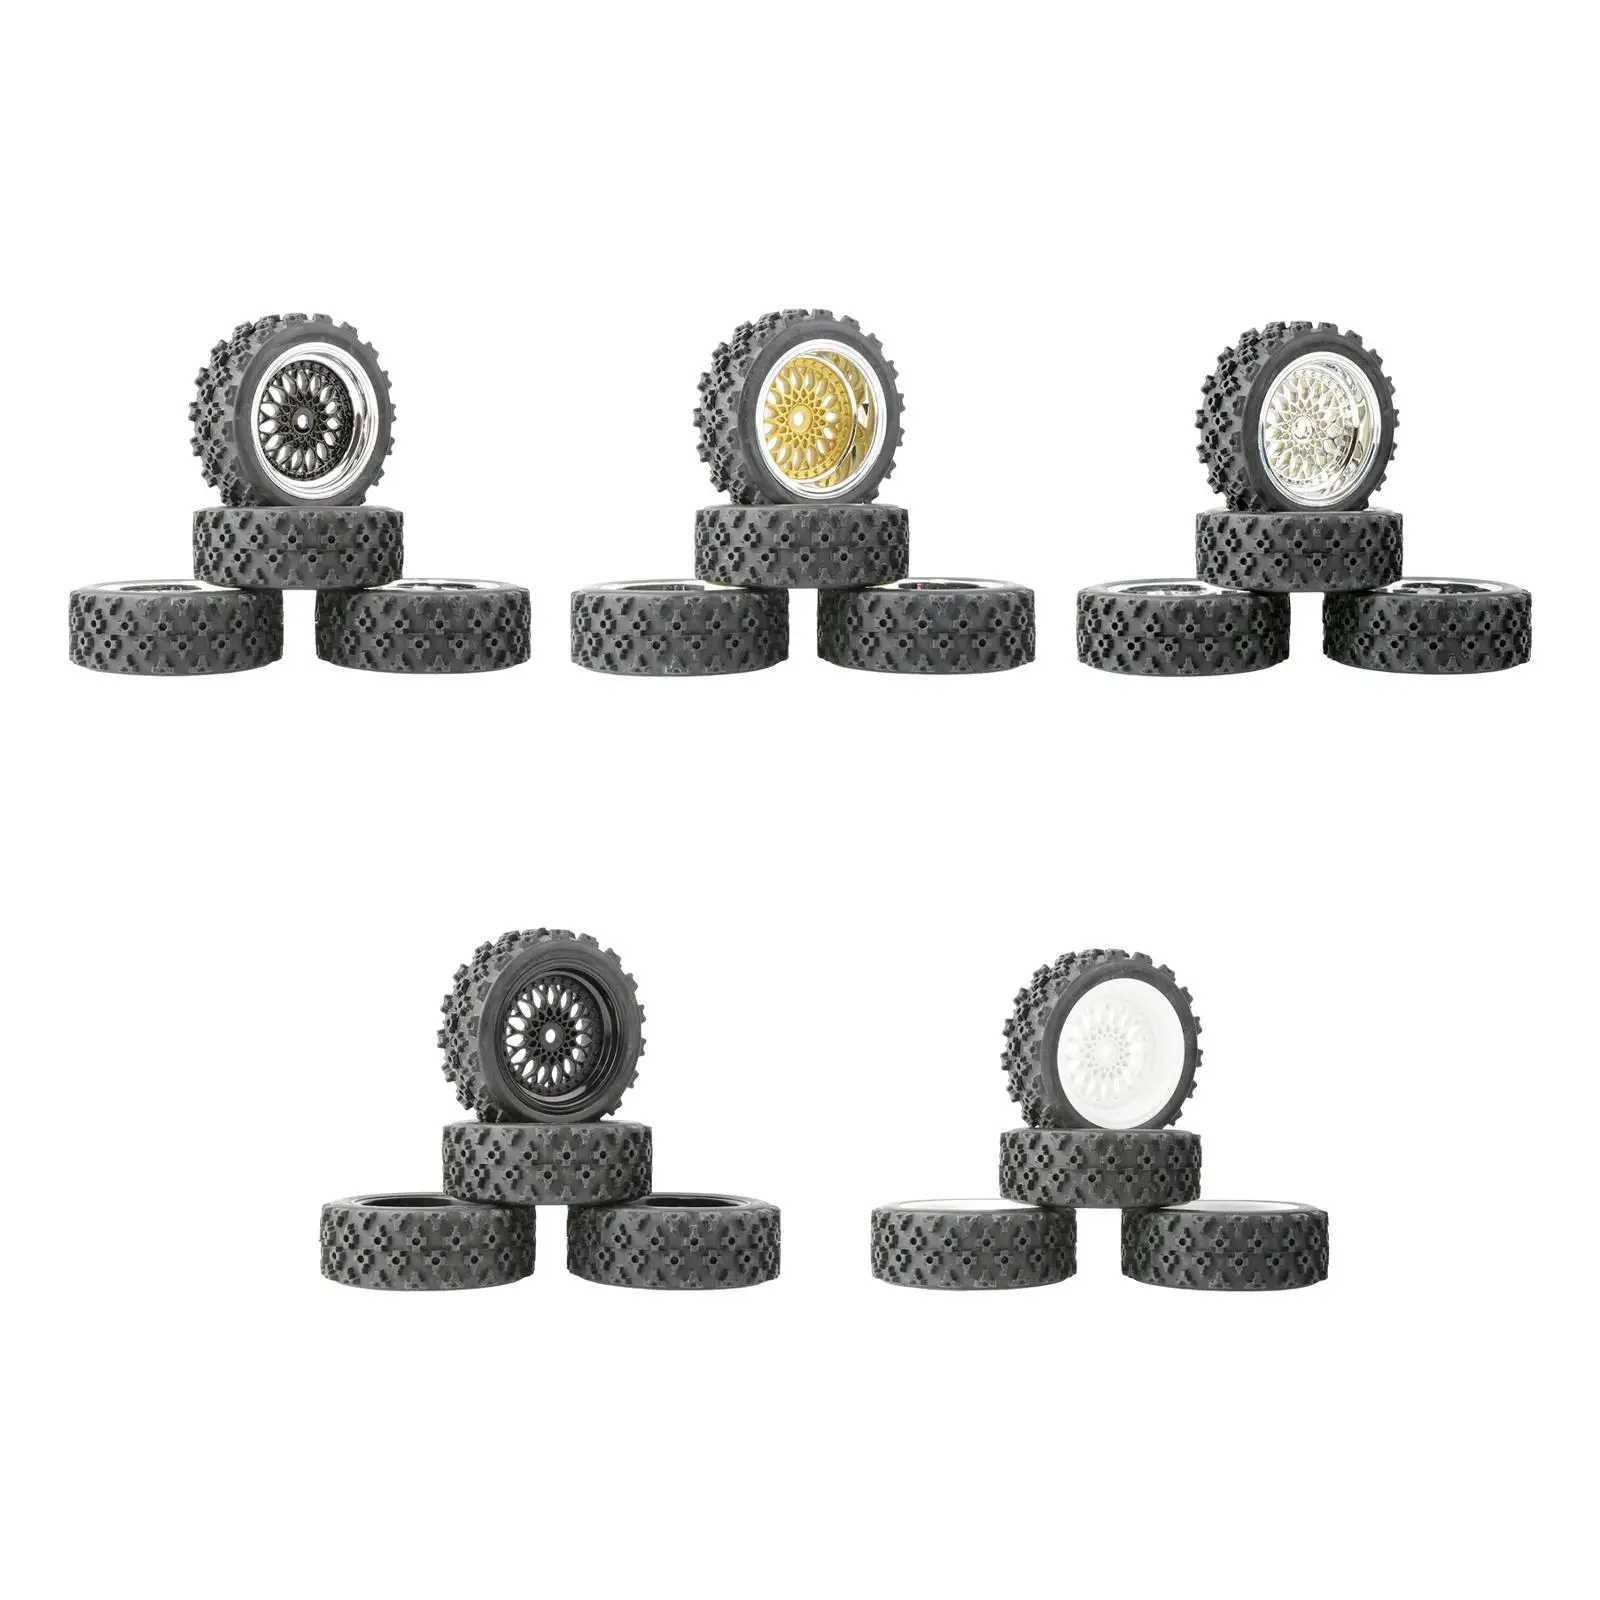 4x Wheel Rim and Rubber Tires Set Parts for Wltoys 144001 124018 124019